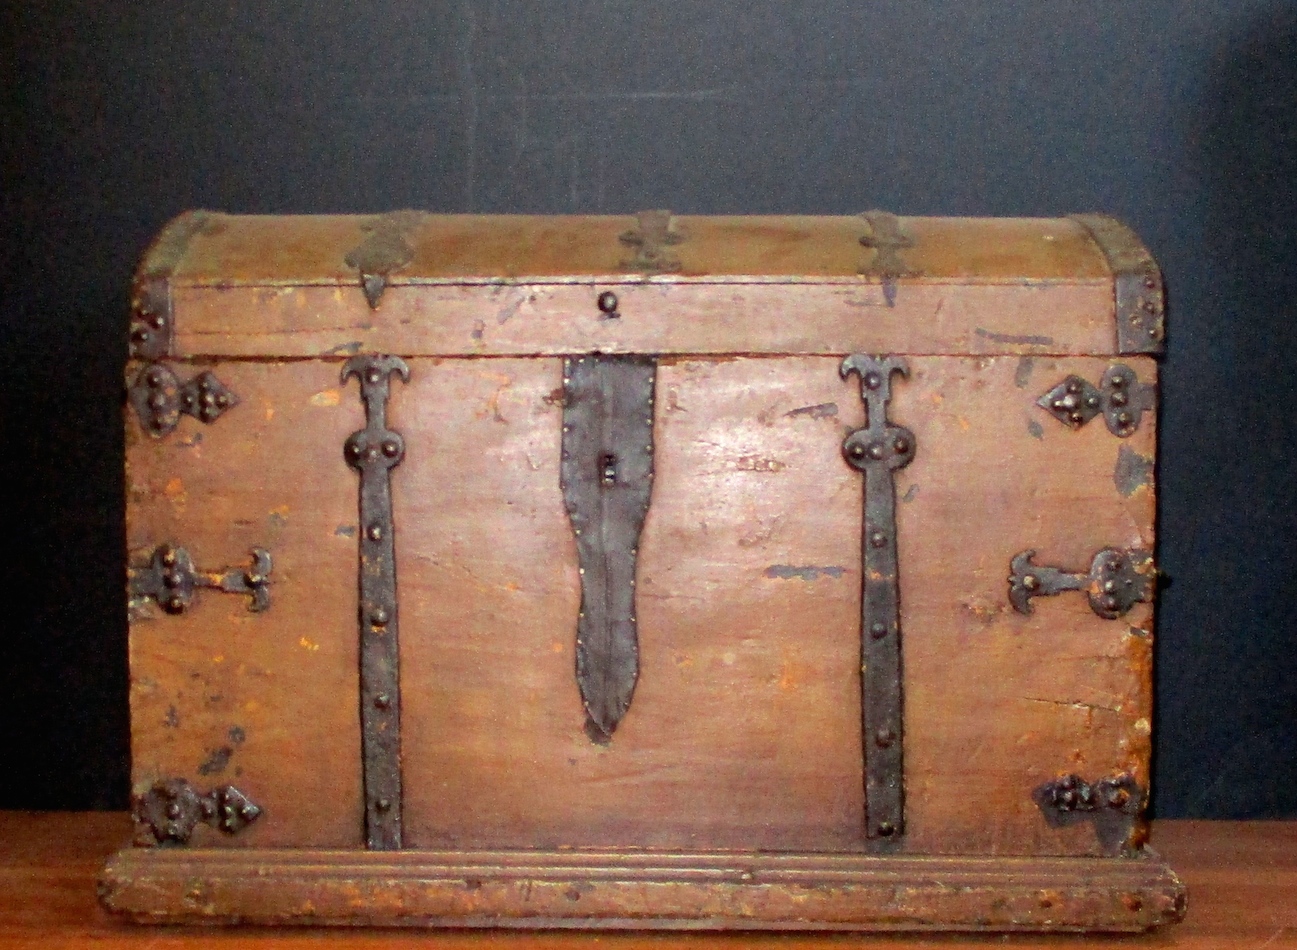 19th Century Domed Sea Captain's Chest w/Metal Embellishments (30 1/2" W x 21" D x 23" H) (In As Found Condition - (We Will Restore to Your Specifications)